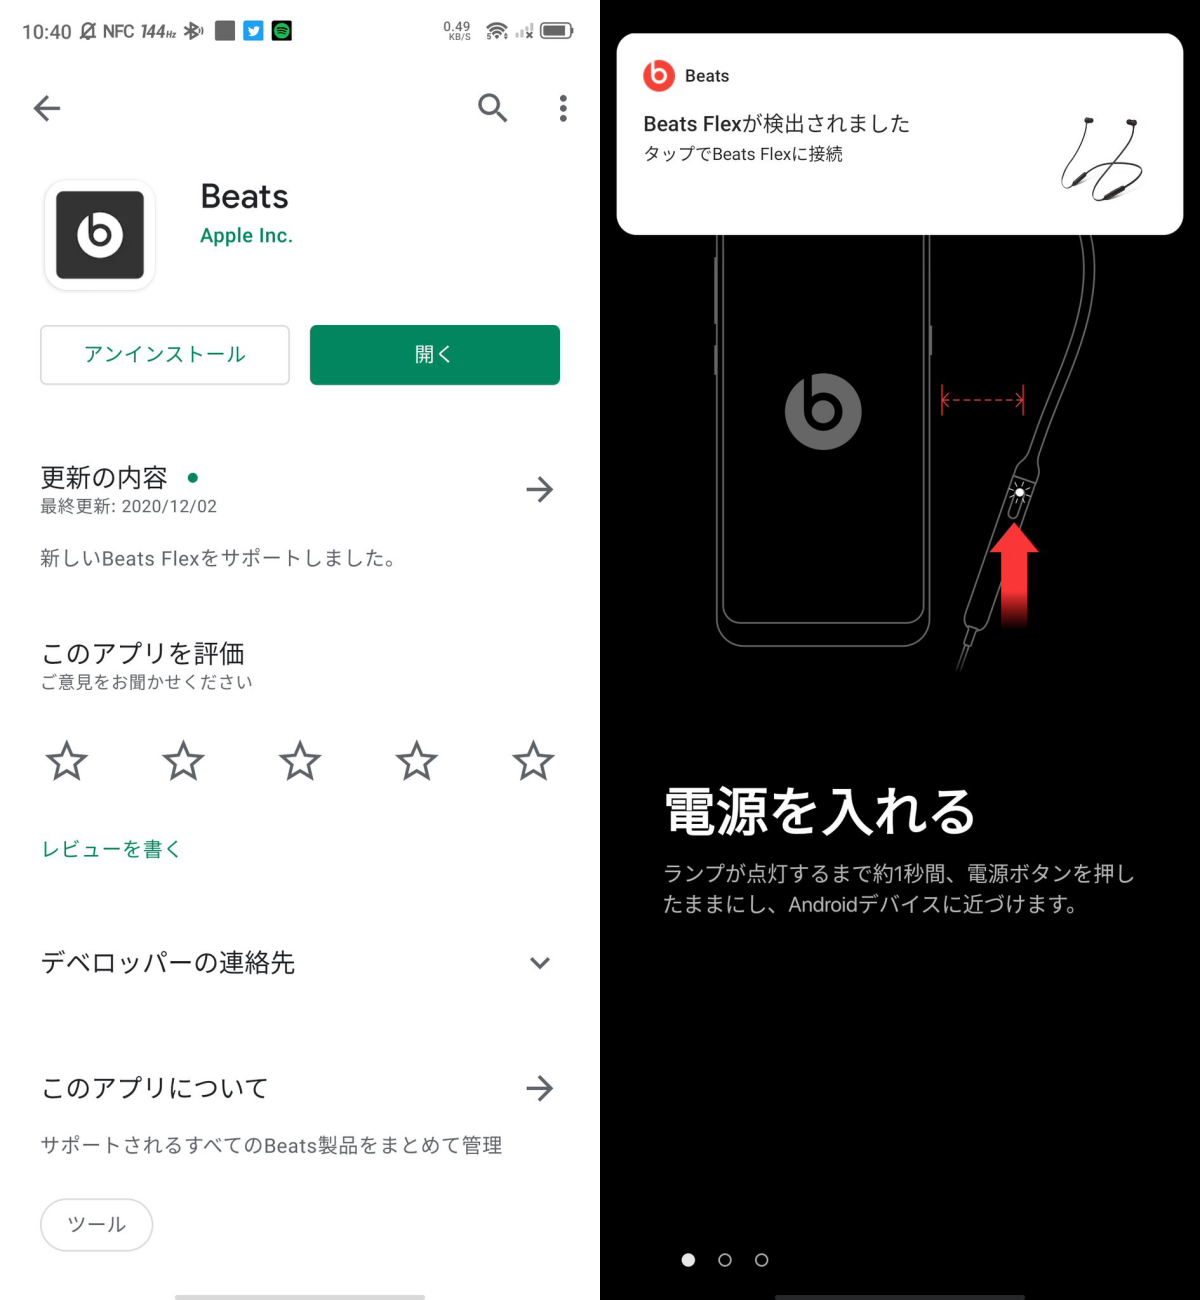 Beats Android